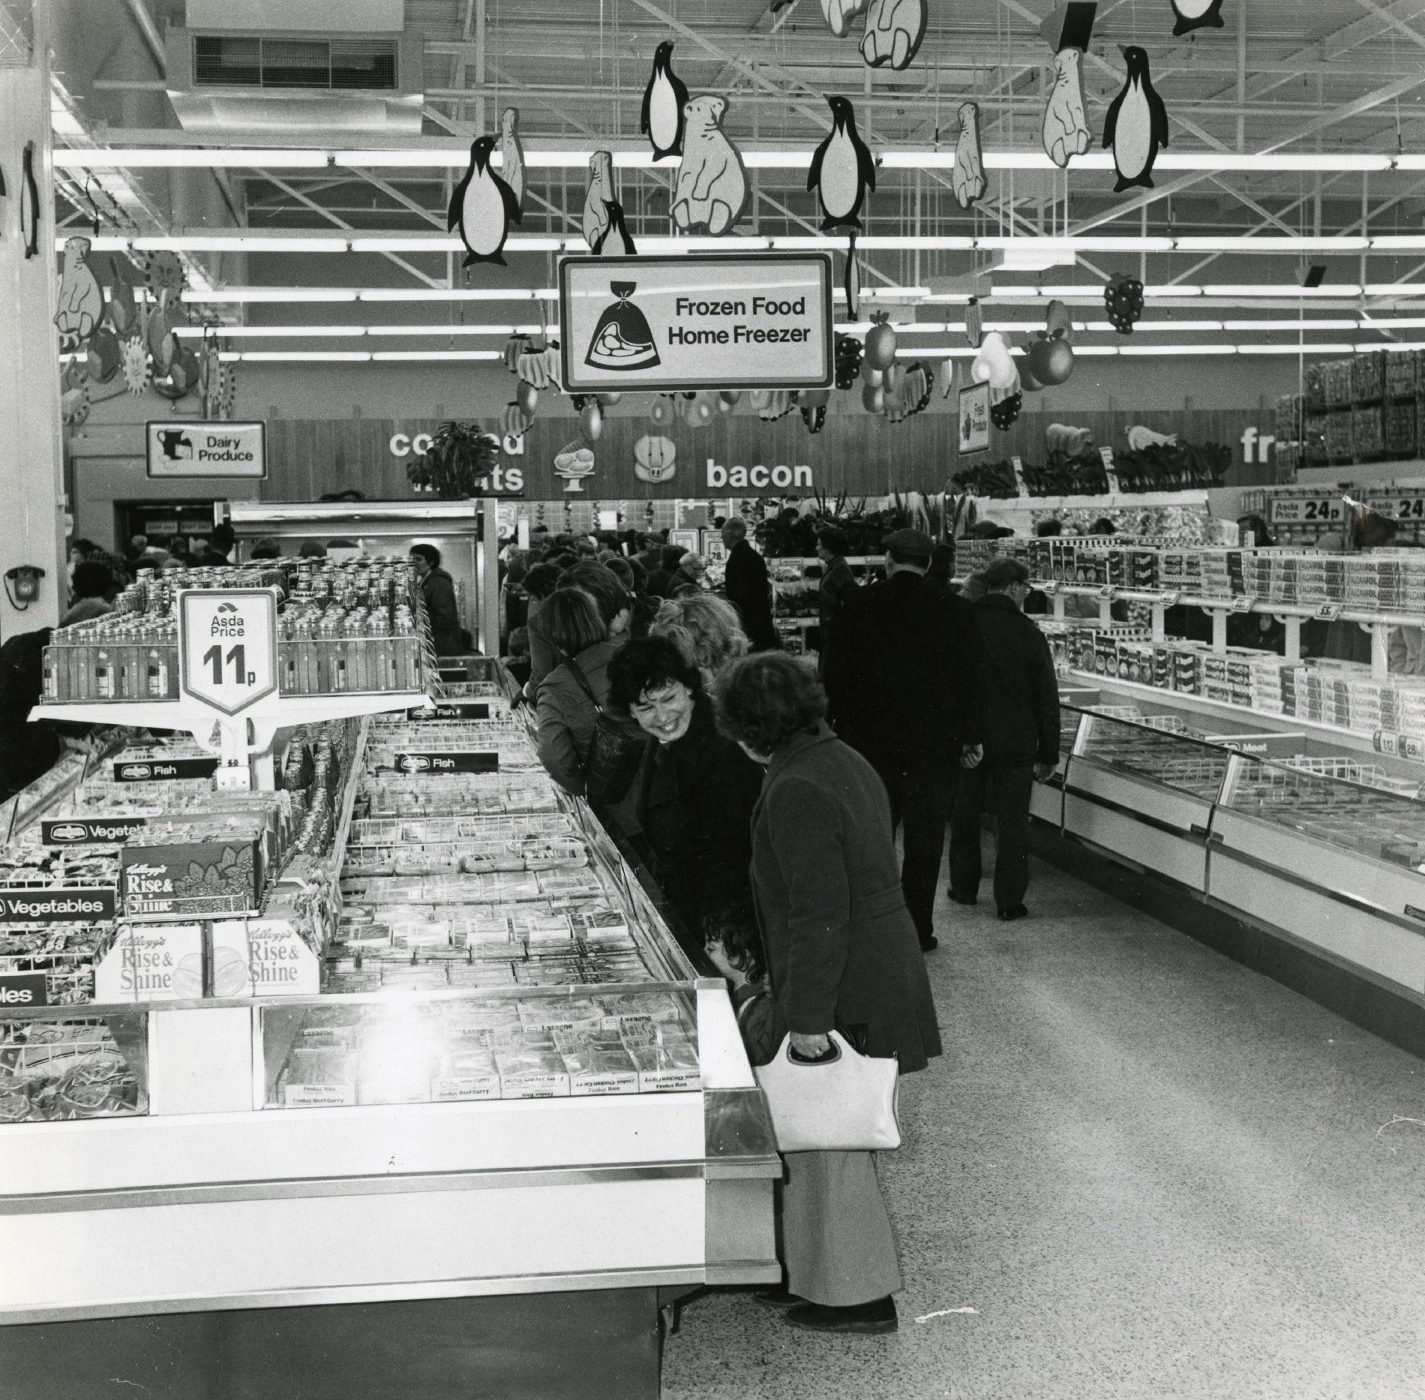 Shoppers browsing the frozen foods in the Kirkton Asda